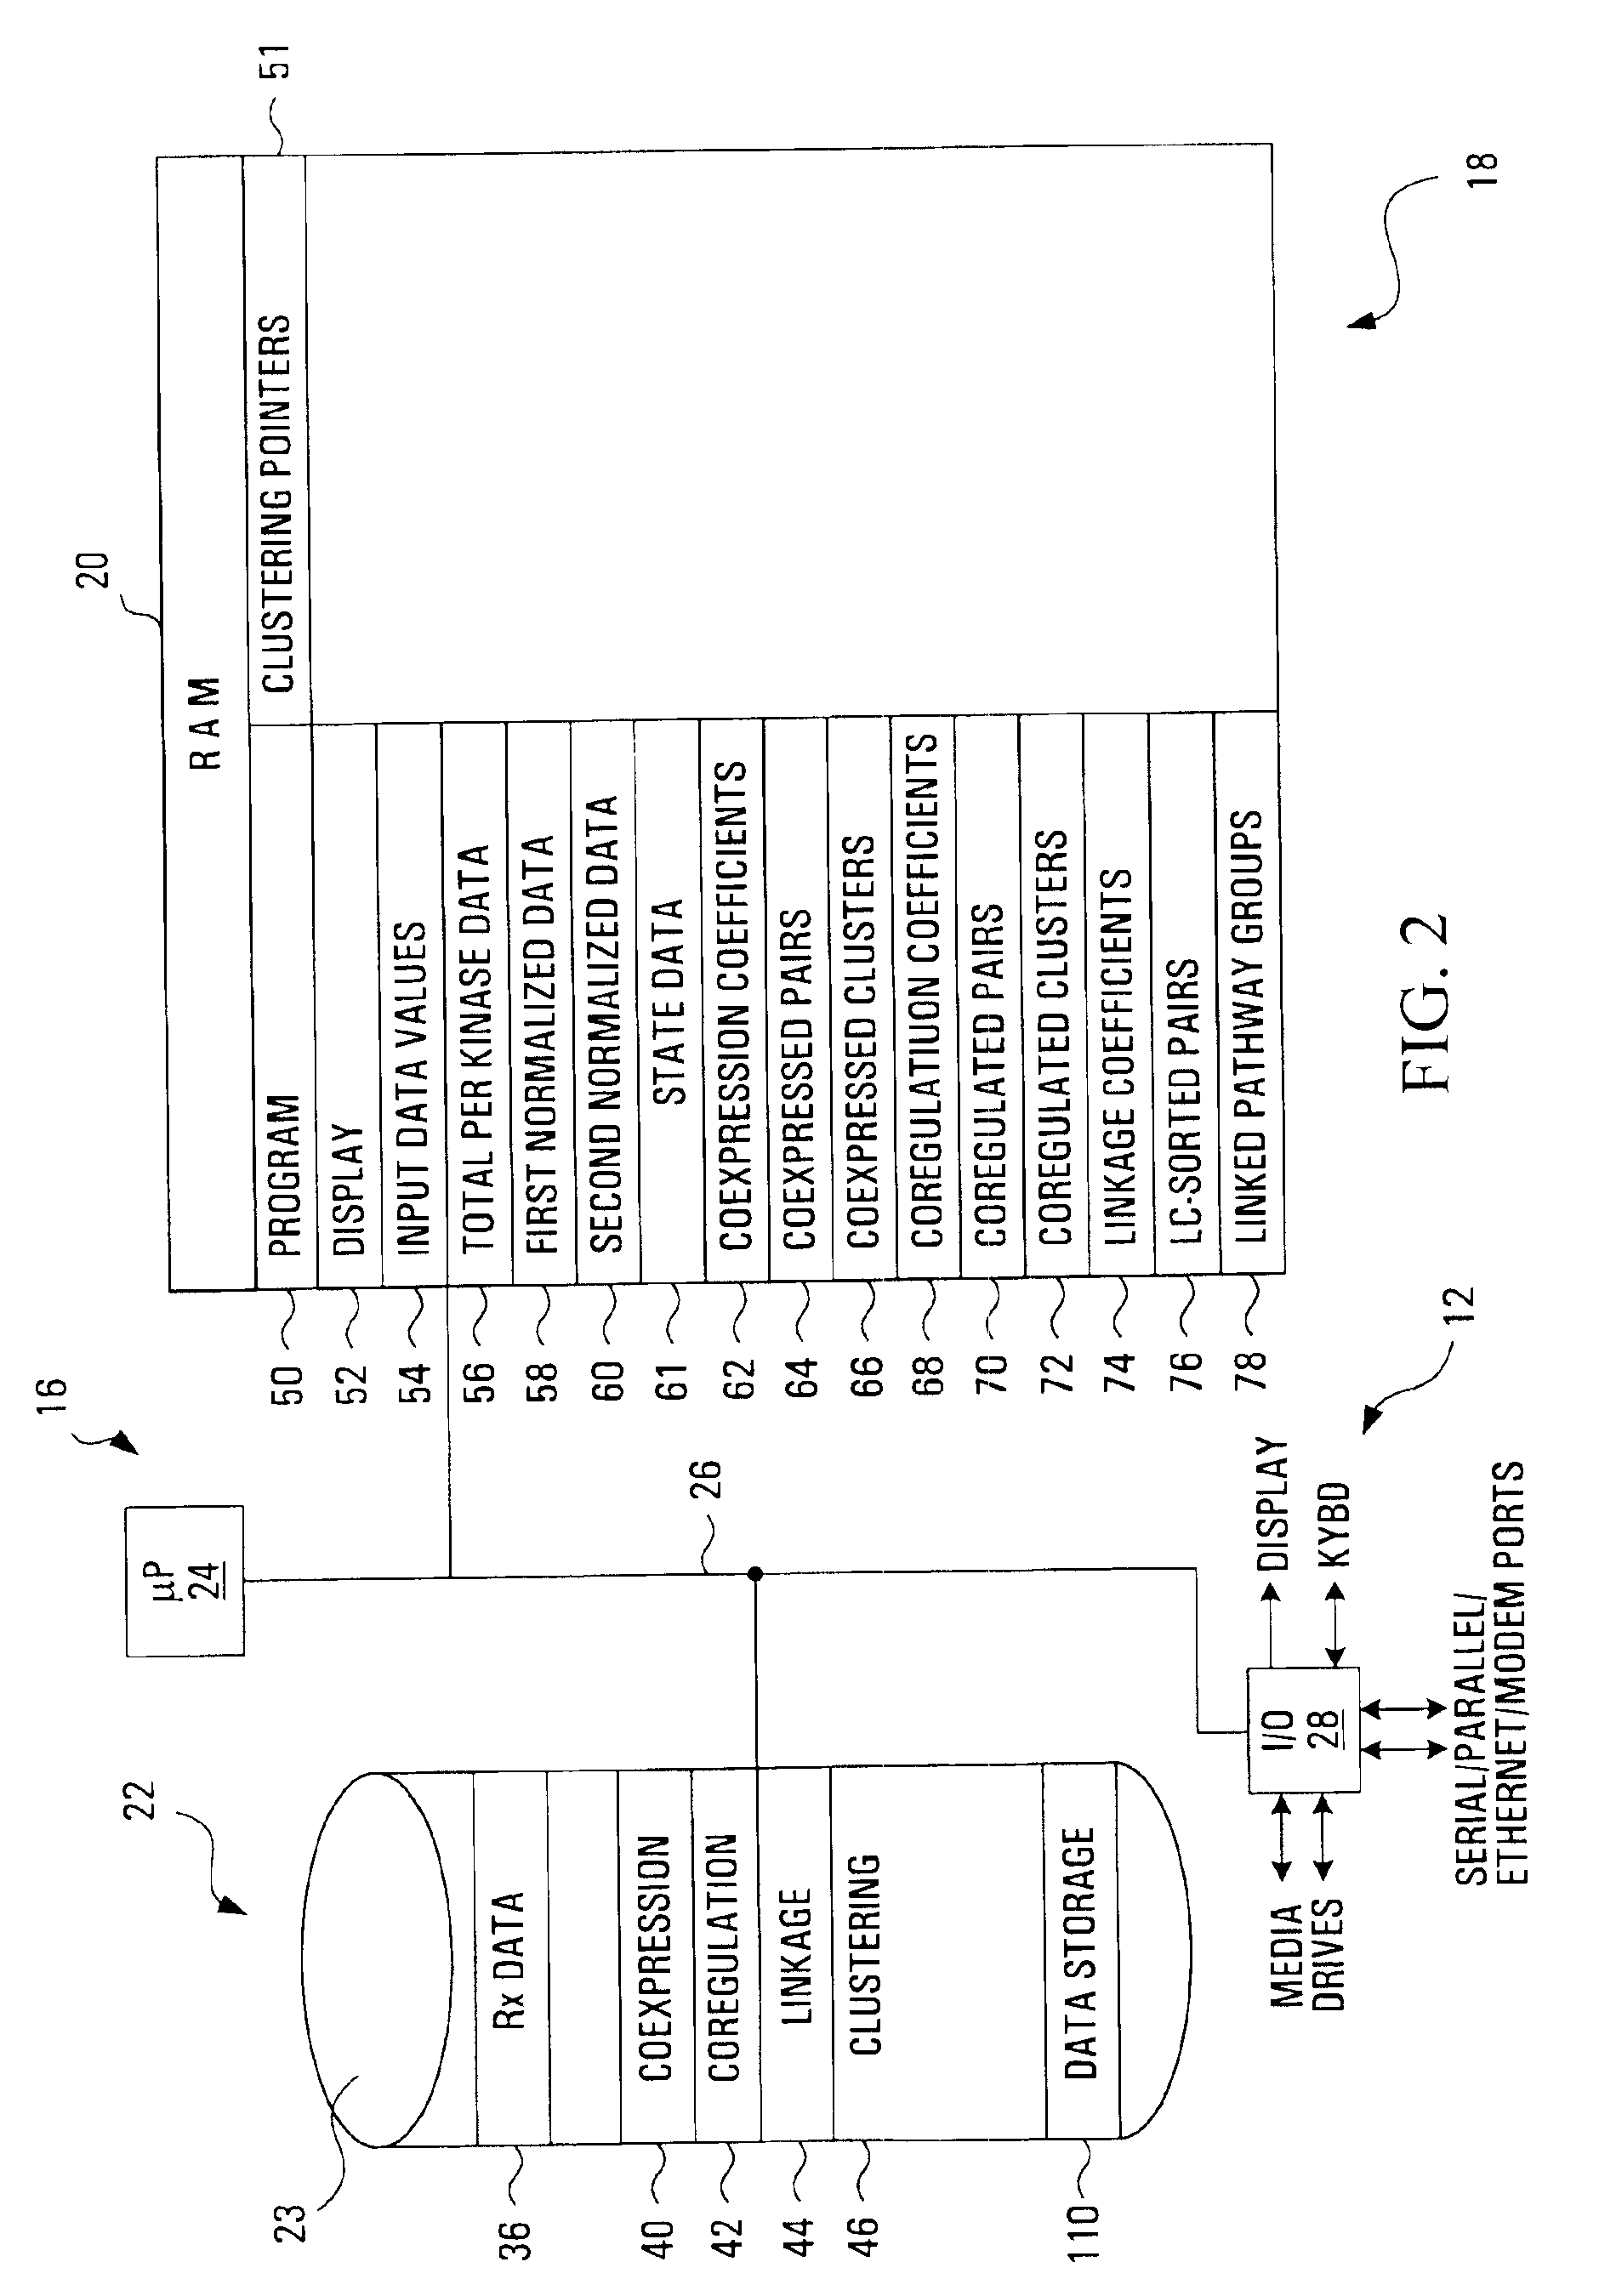 Method, apparatus, media and signals for identifying associated cell signaling proteins